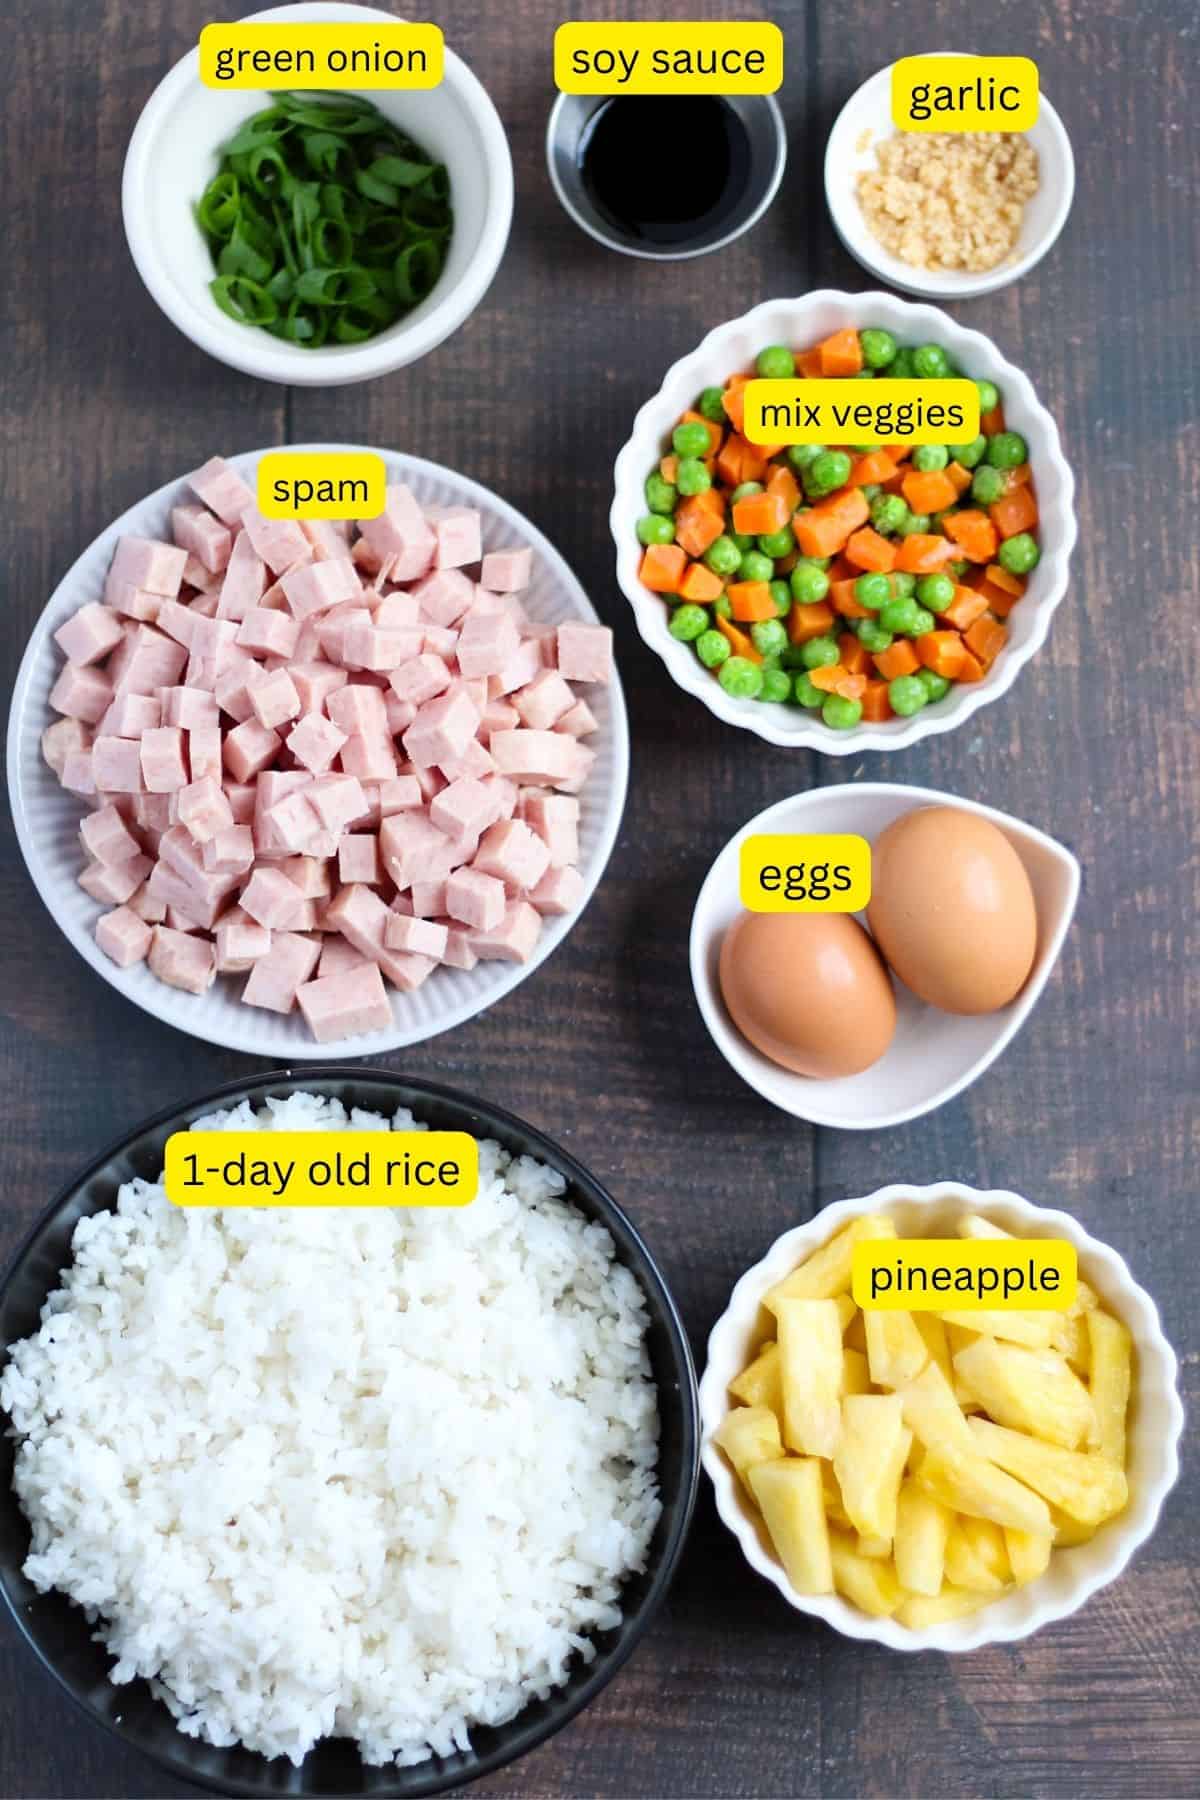 Ingredients for fried rice with spam and pineapple.